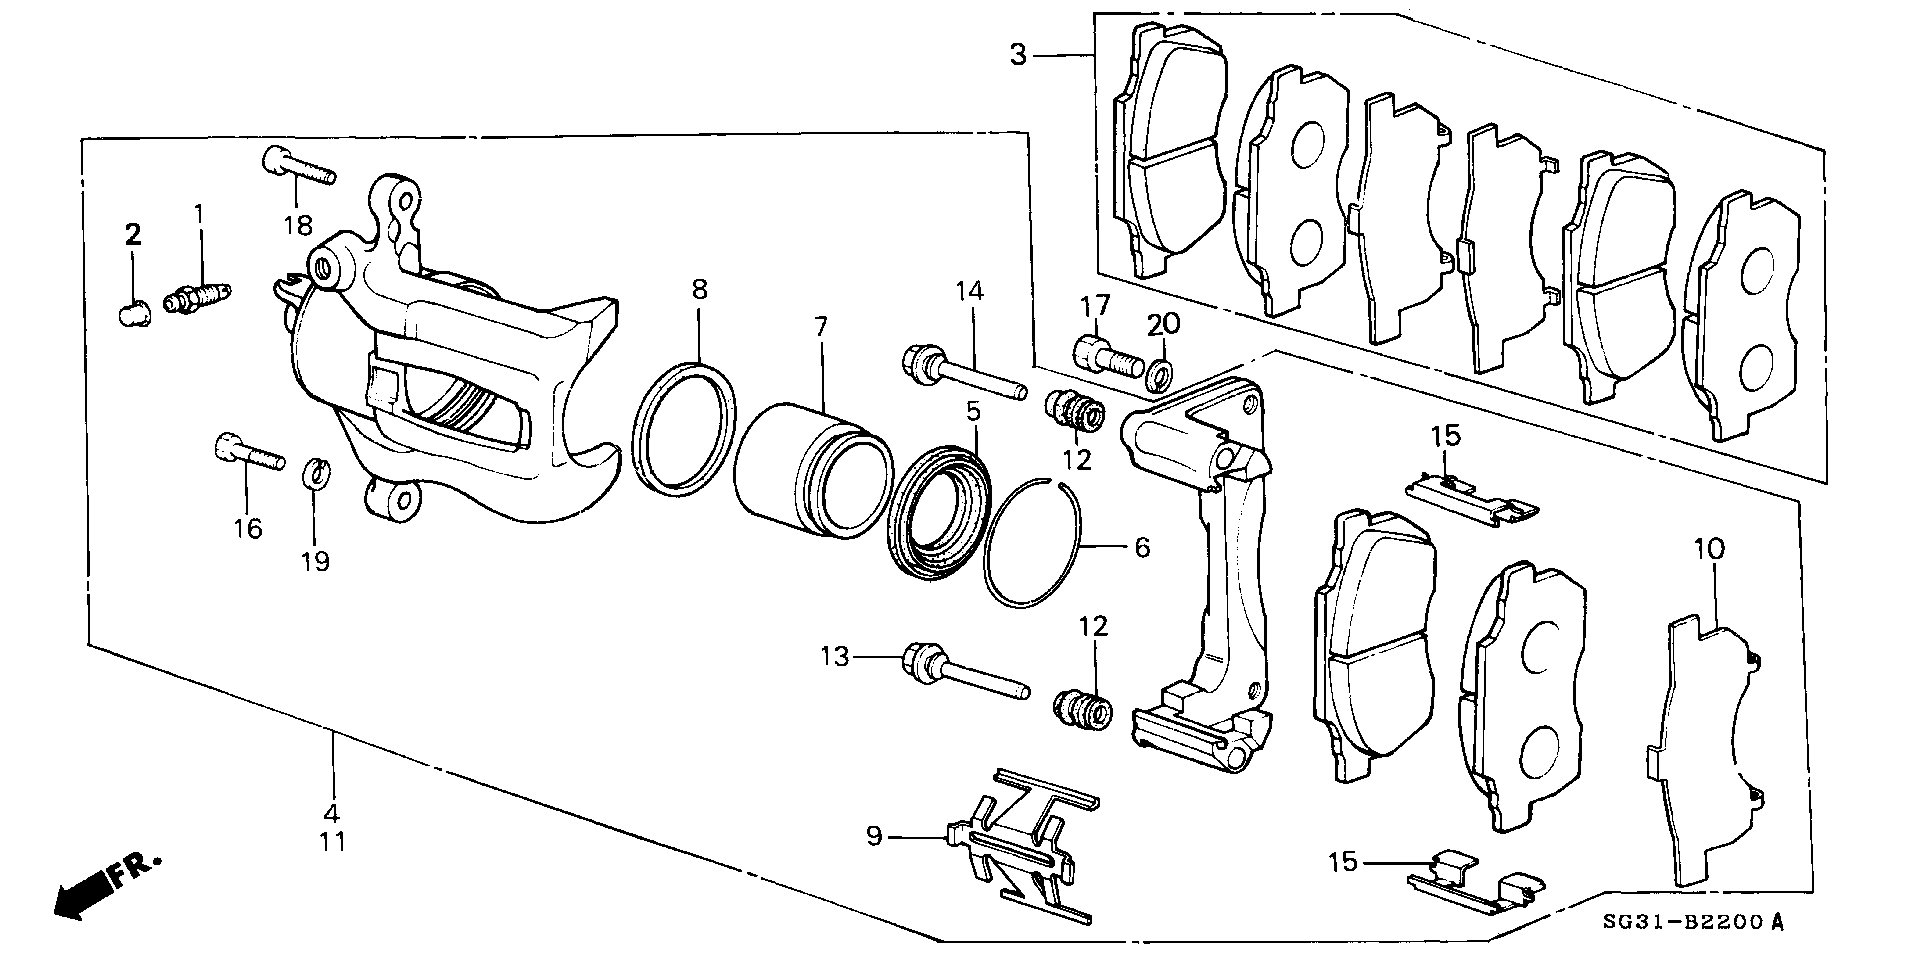 FRONT BRAKE CALIPERS (15CL-13VN)